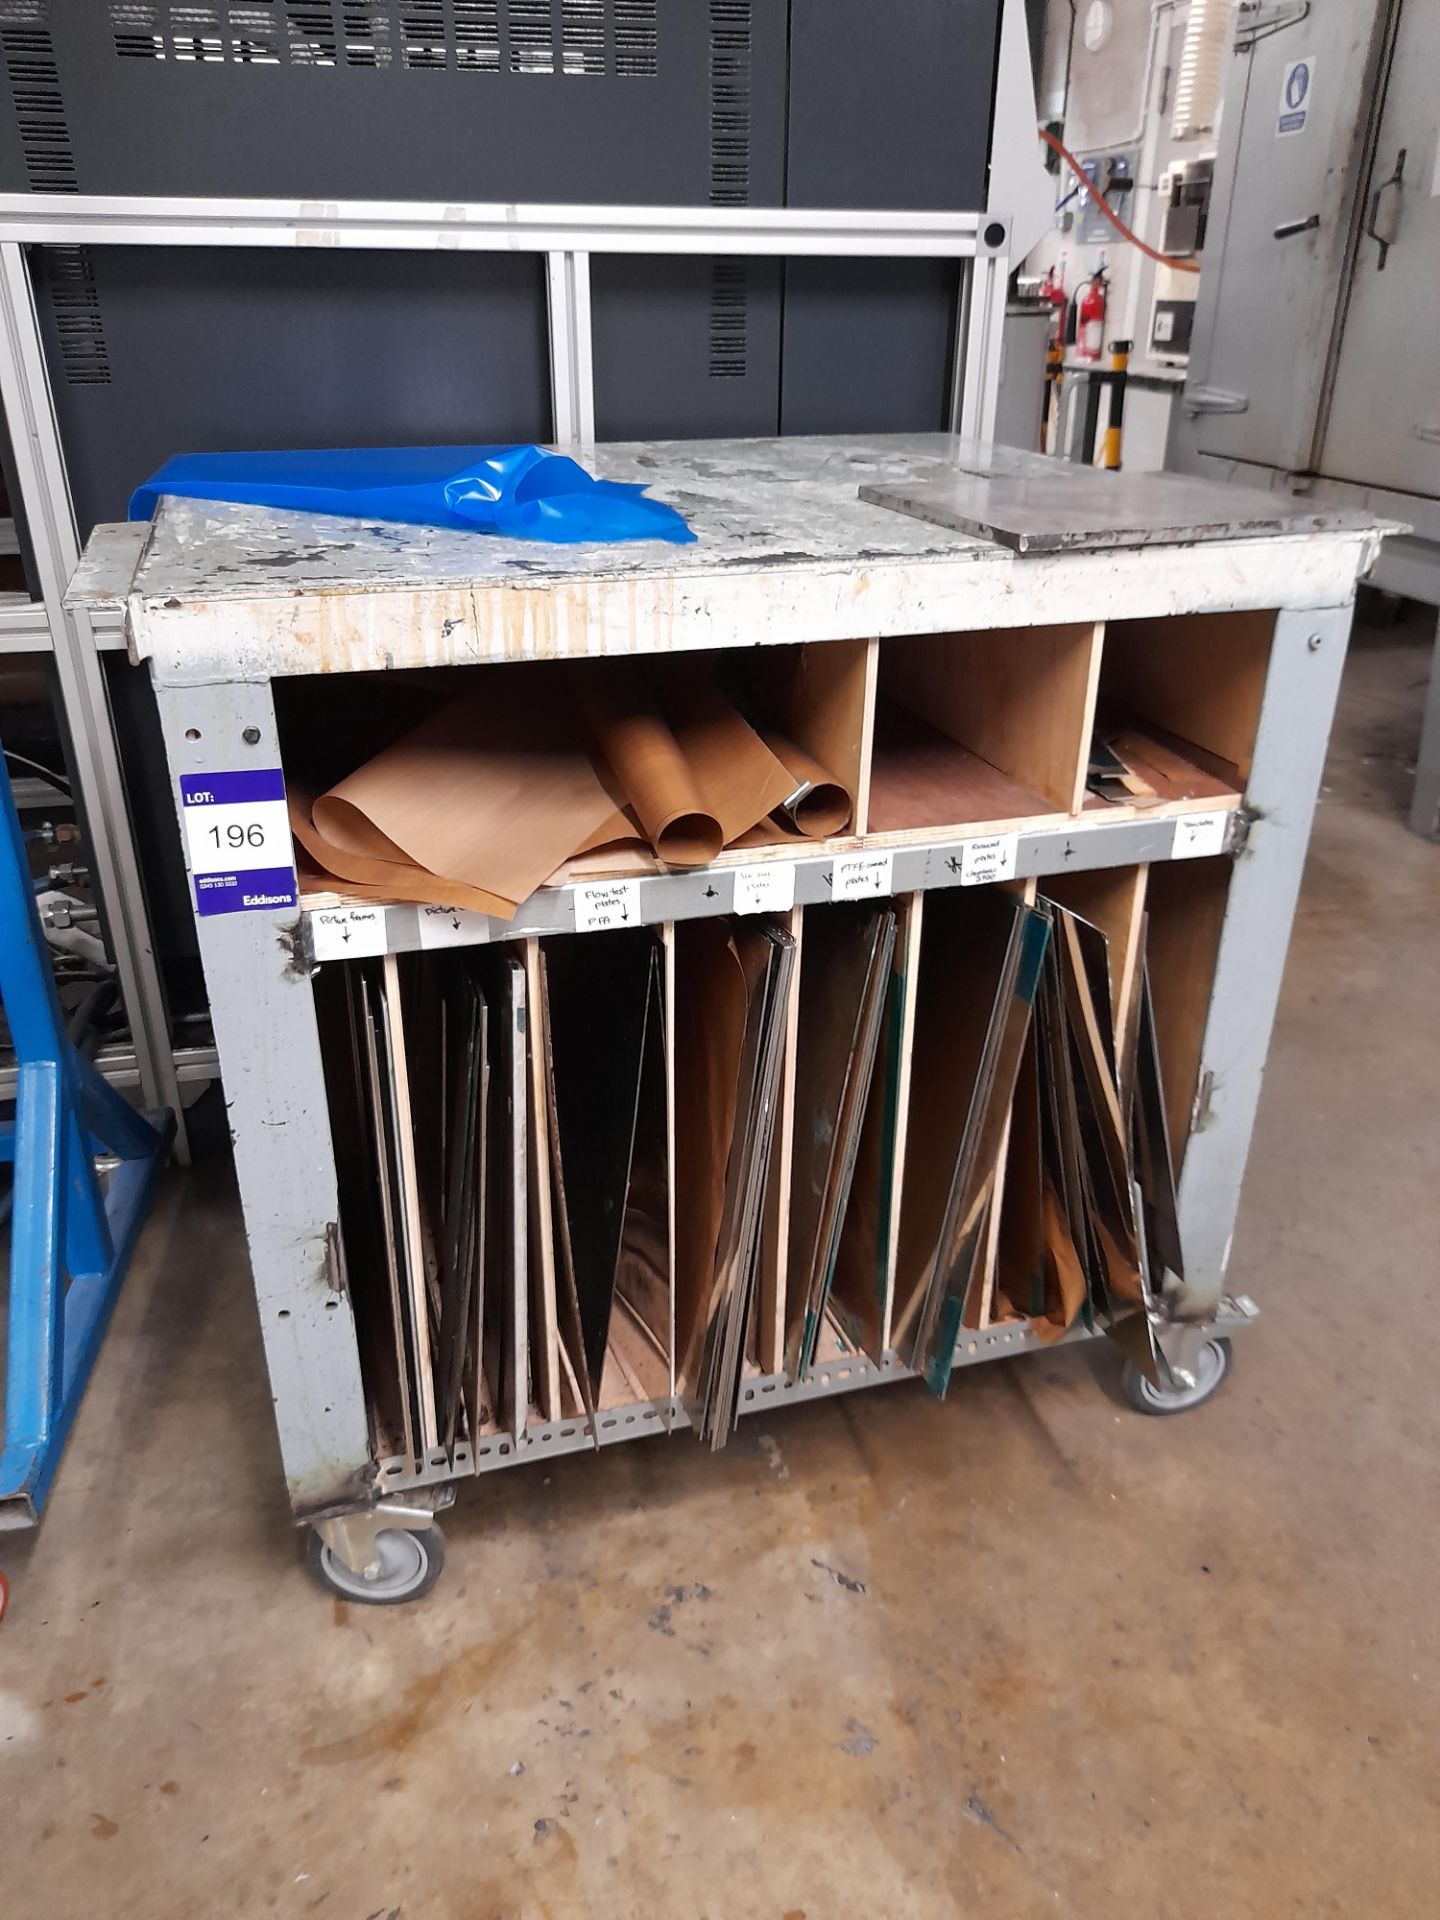 Steel fabricated mobile packing bench, with quantity of metal plates - Image 2 of 3